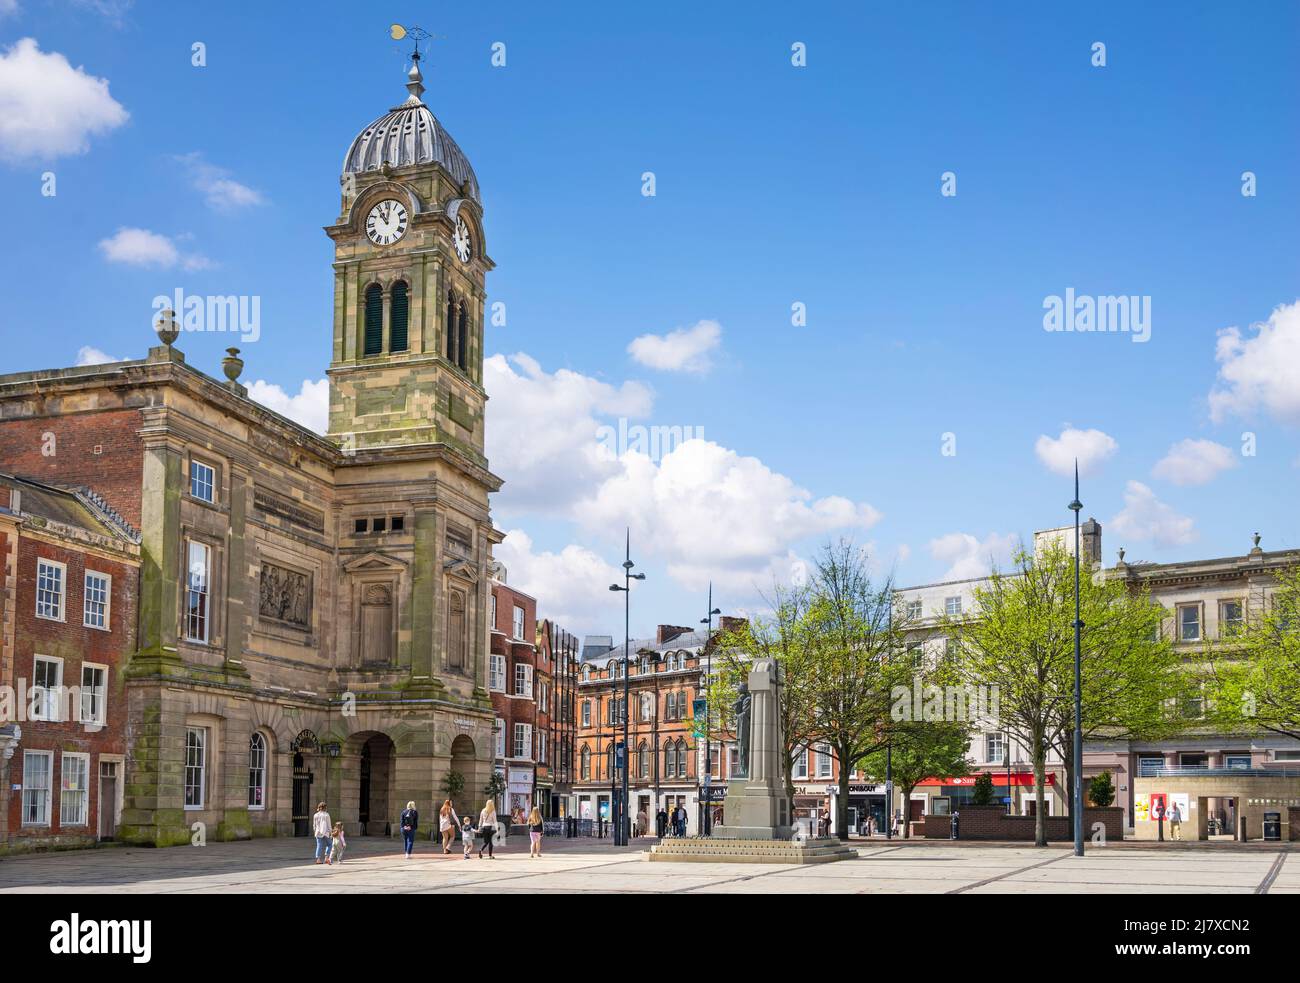 Derby Guildhall theatre and War memorial in the Market Place Derby city centre Derbyshire England UK GB Europe Stock Photo